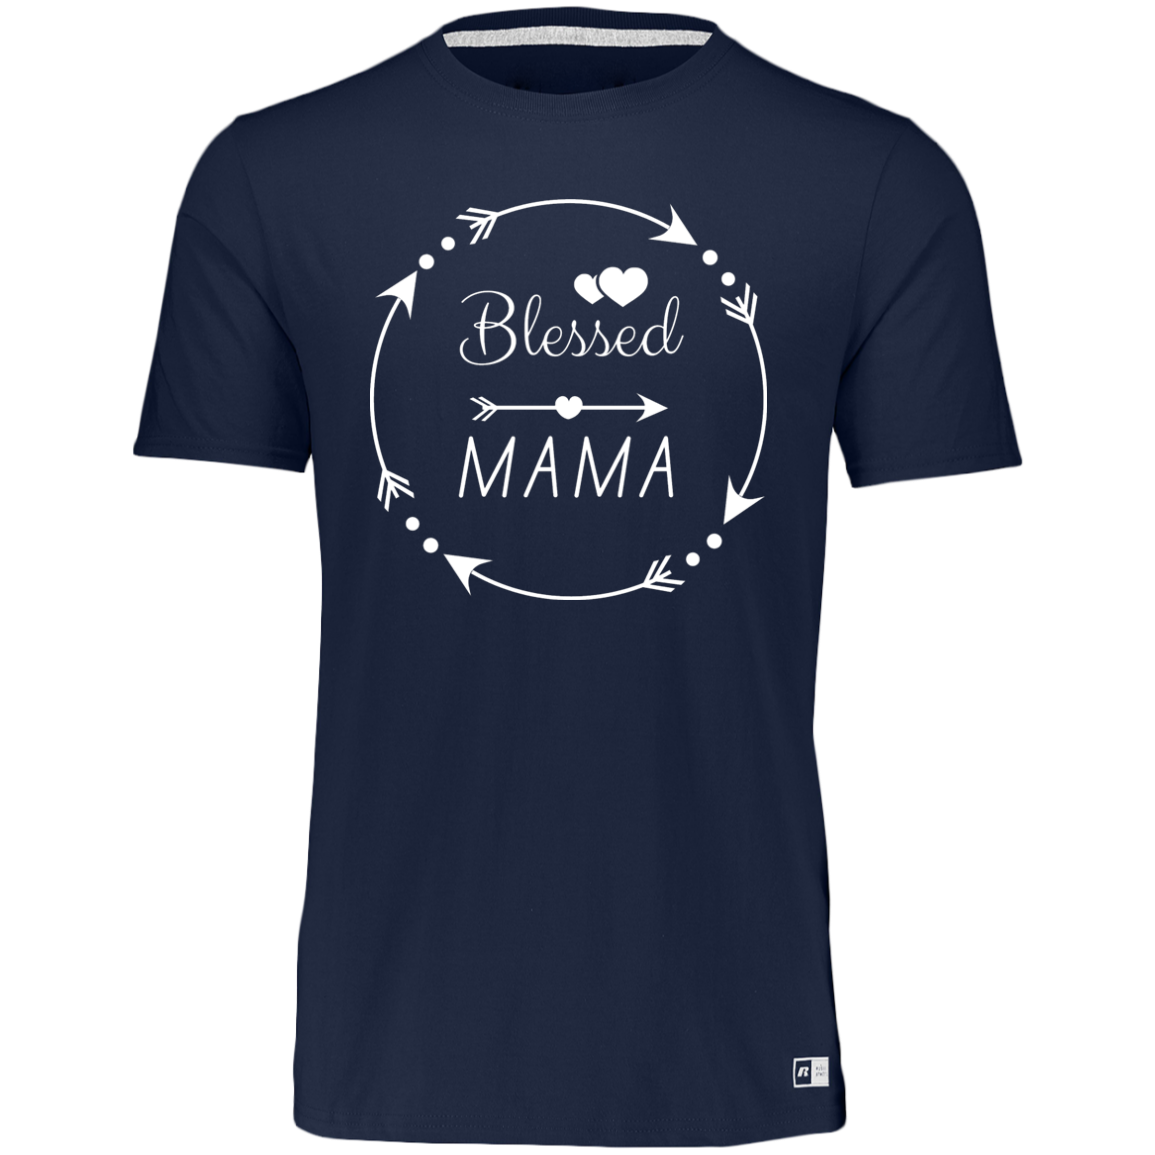 BLESSED MAMA T-SHIRT